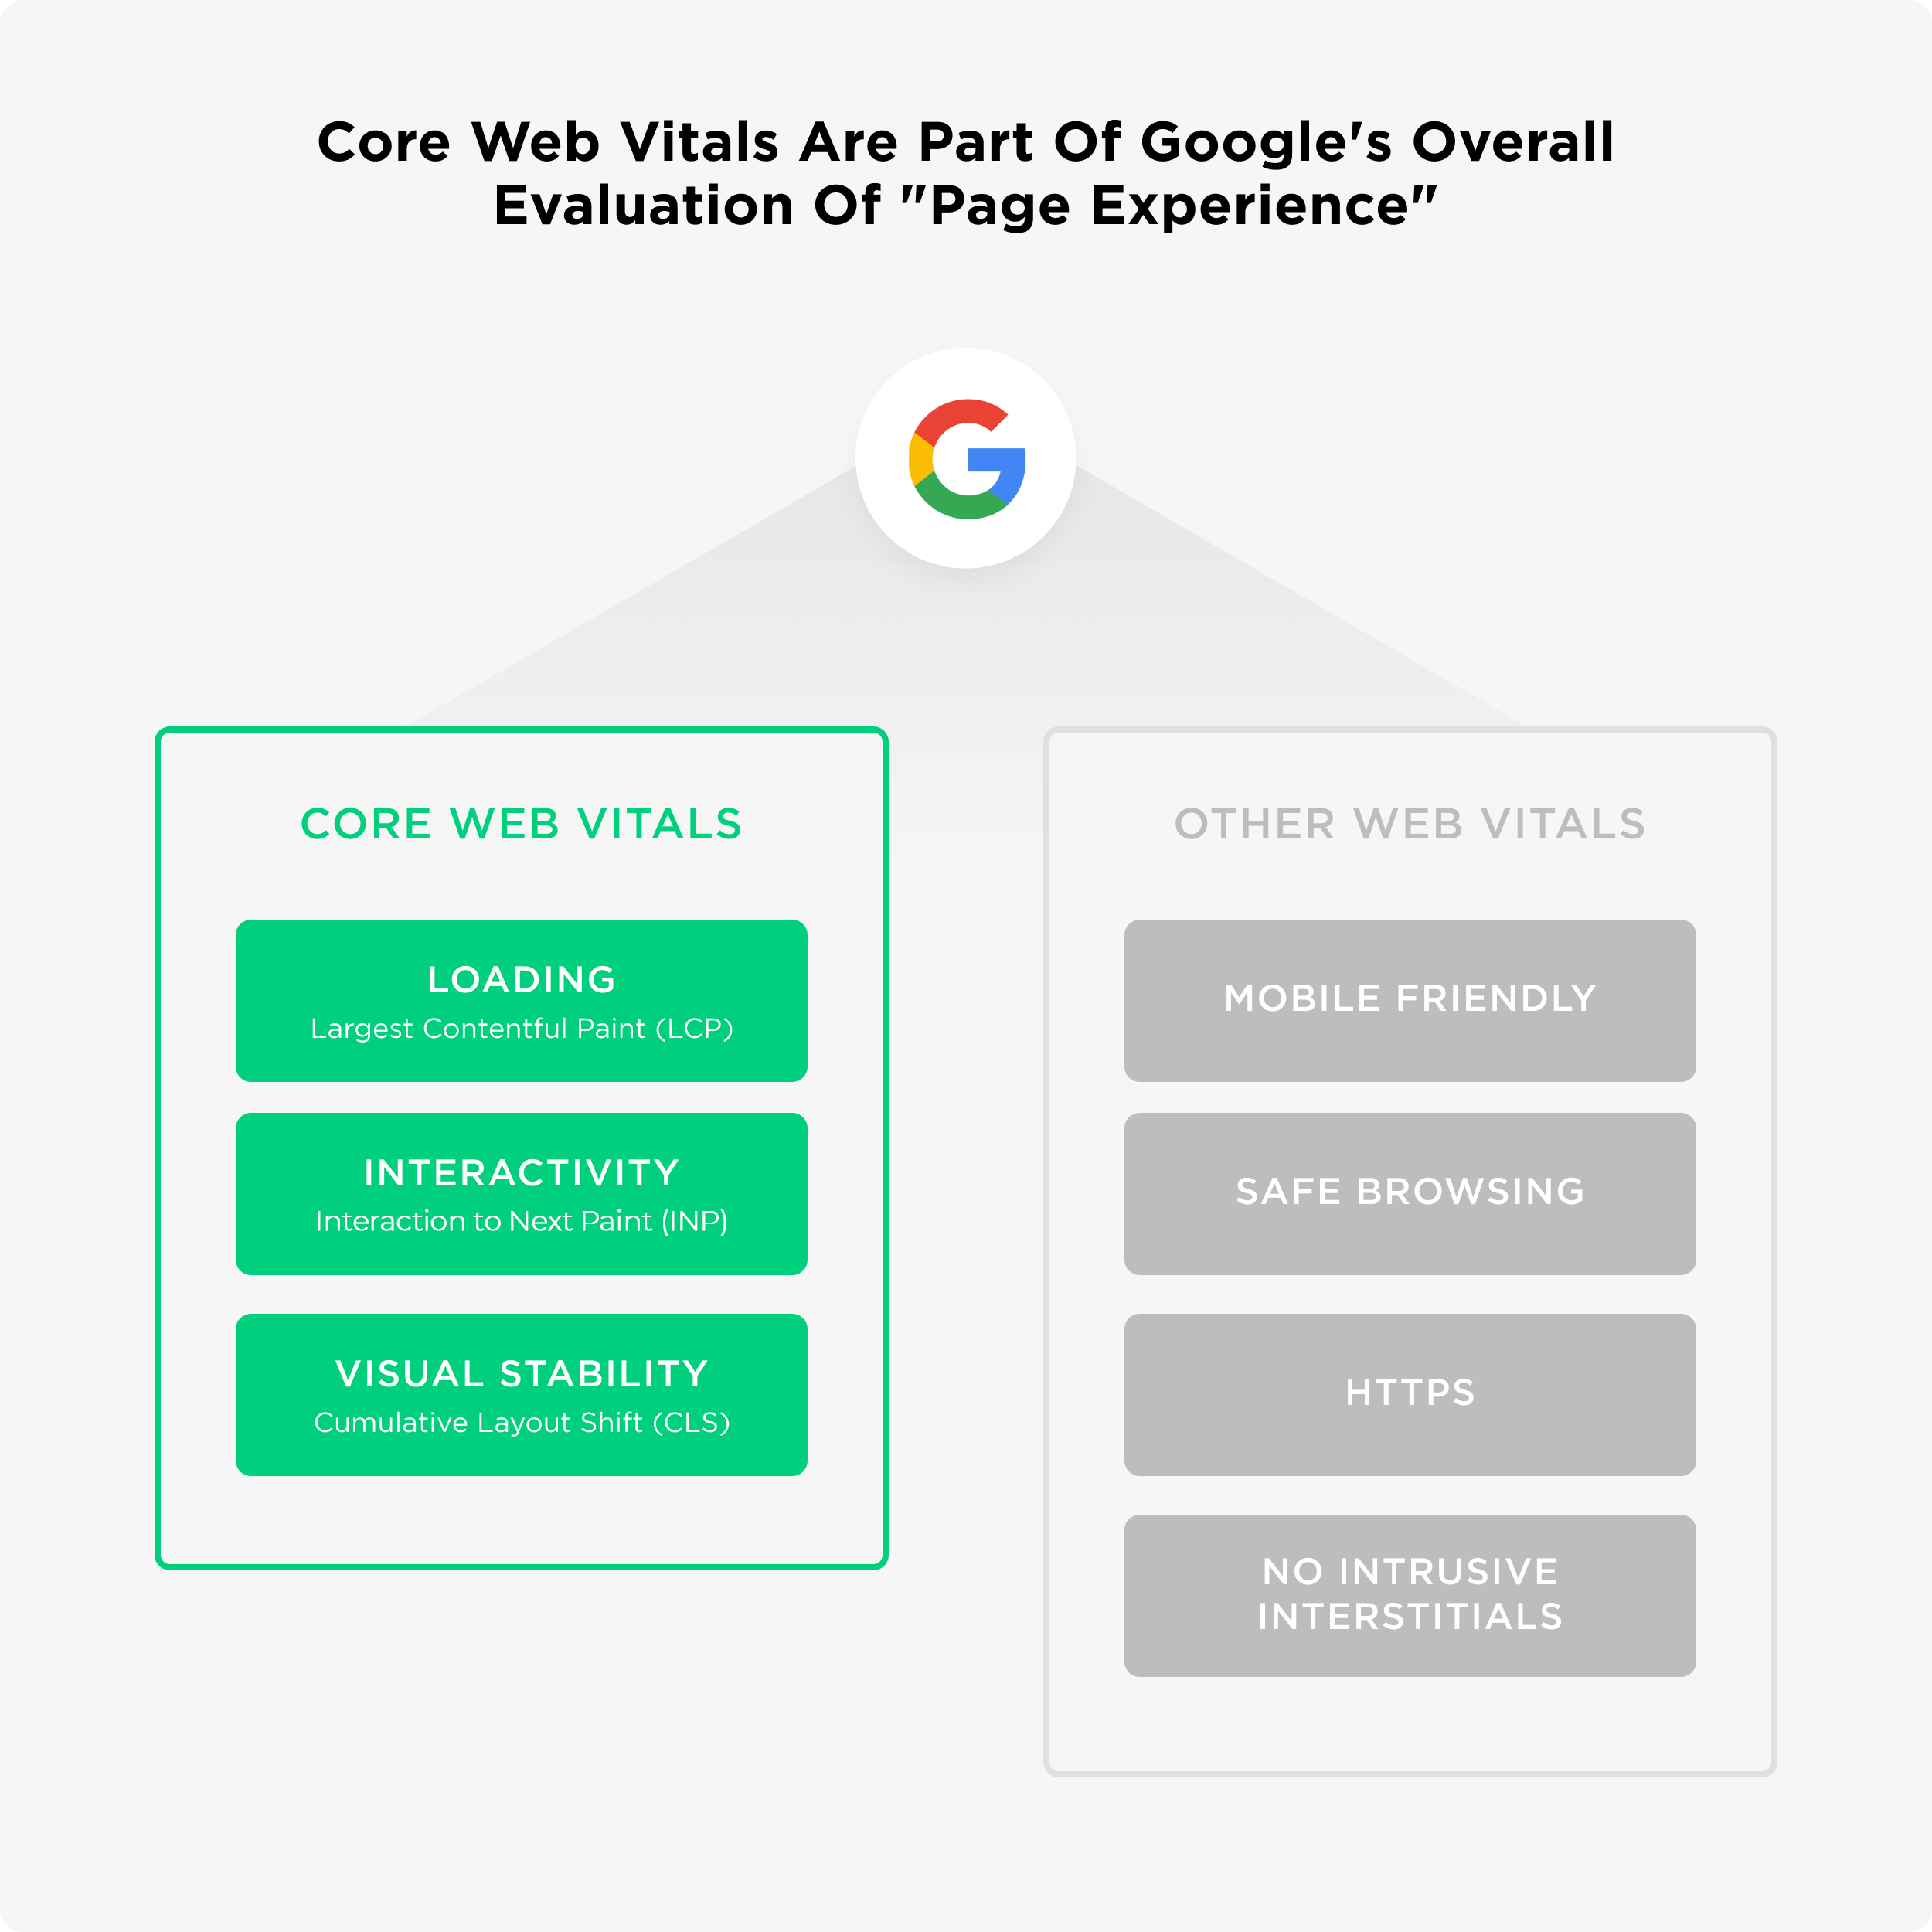 Core Web Vitals Are Part Of Google's Overall Evaluation Of "Page Experience"